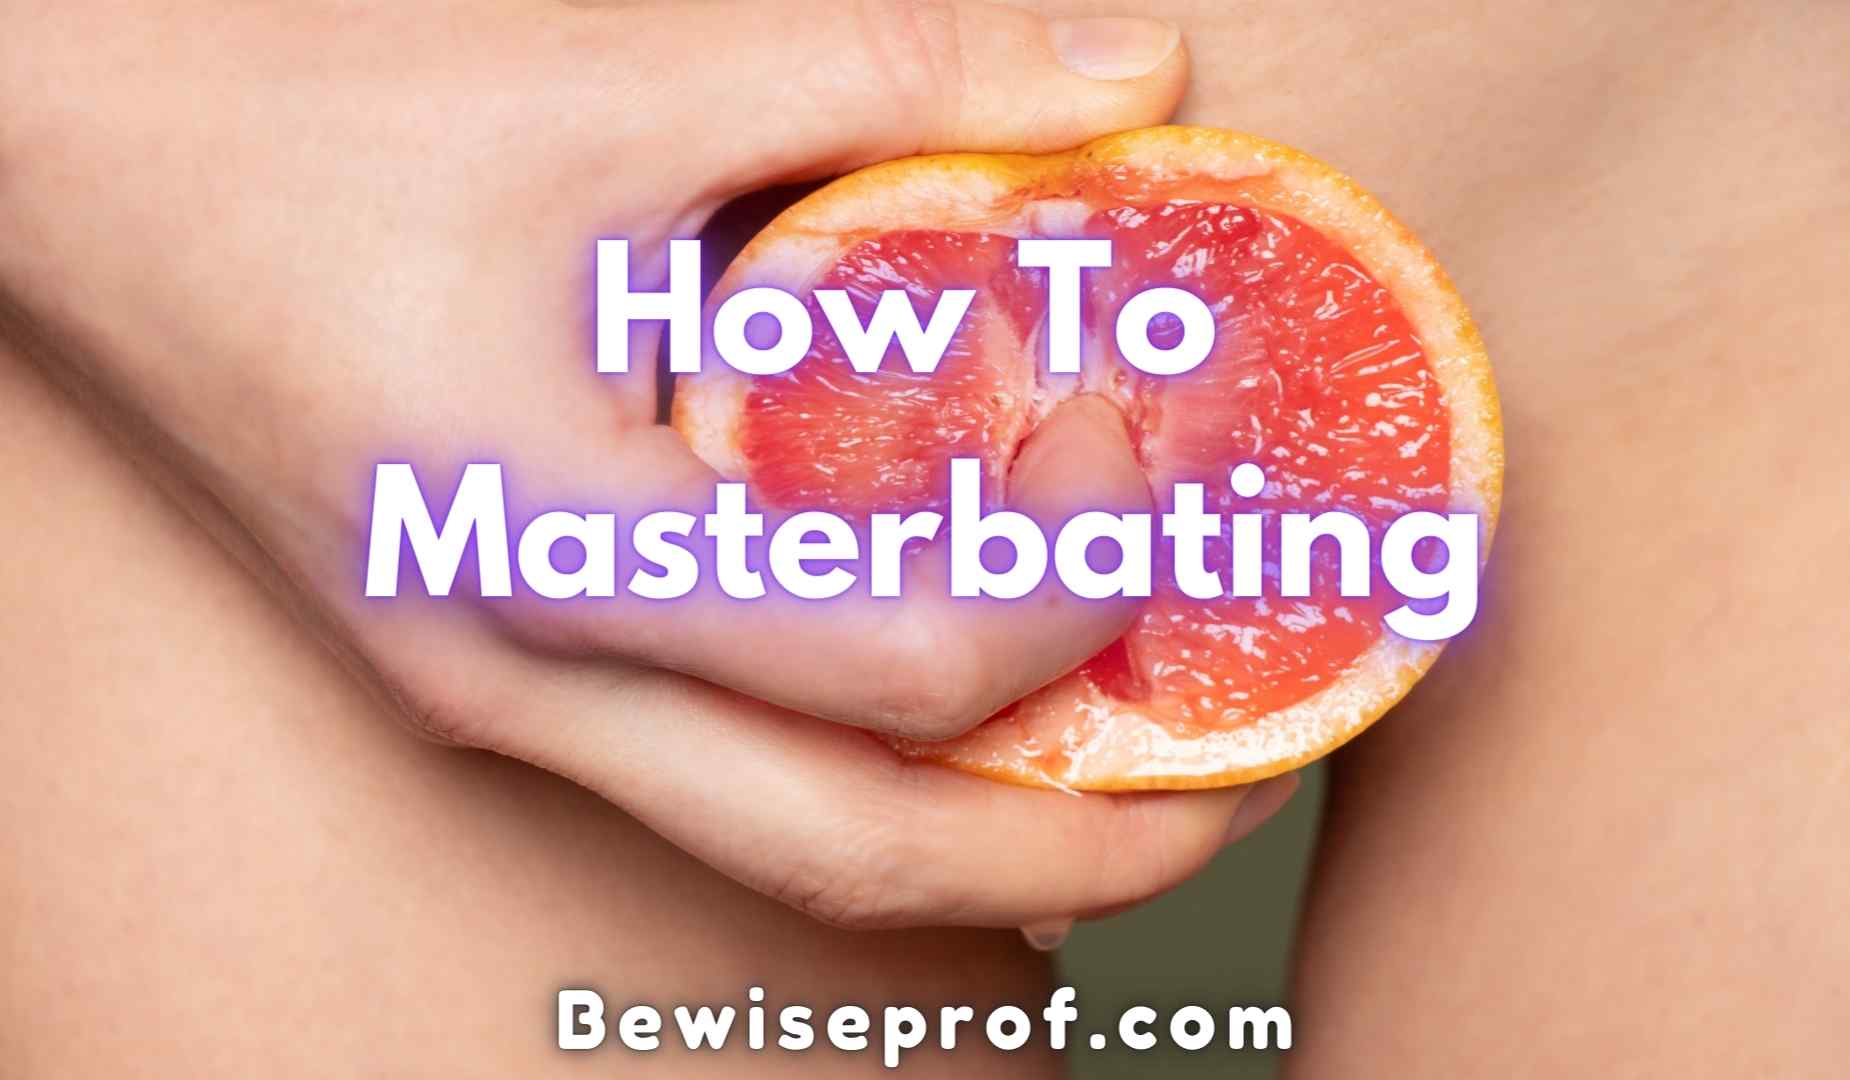 How To Masterbating